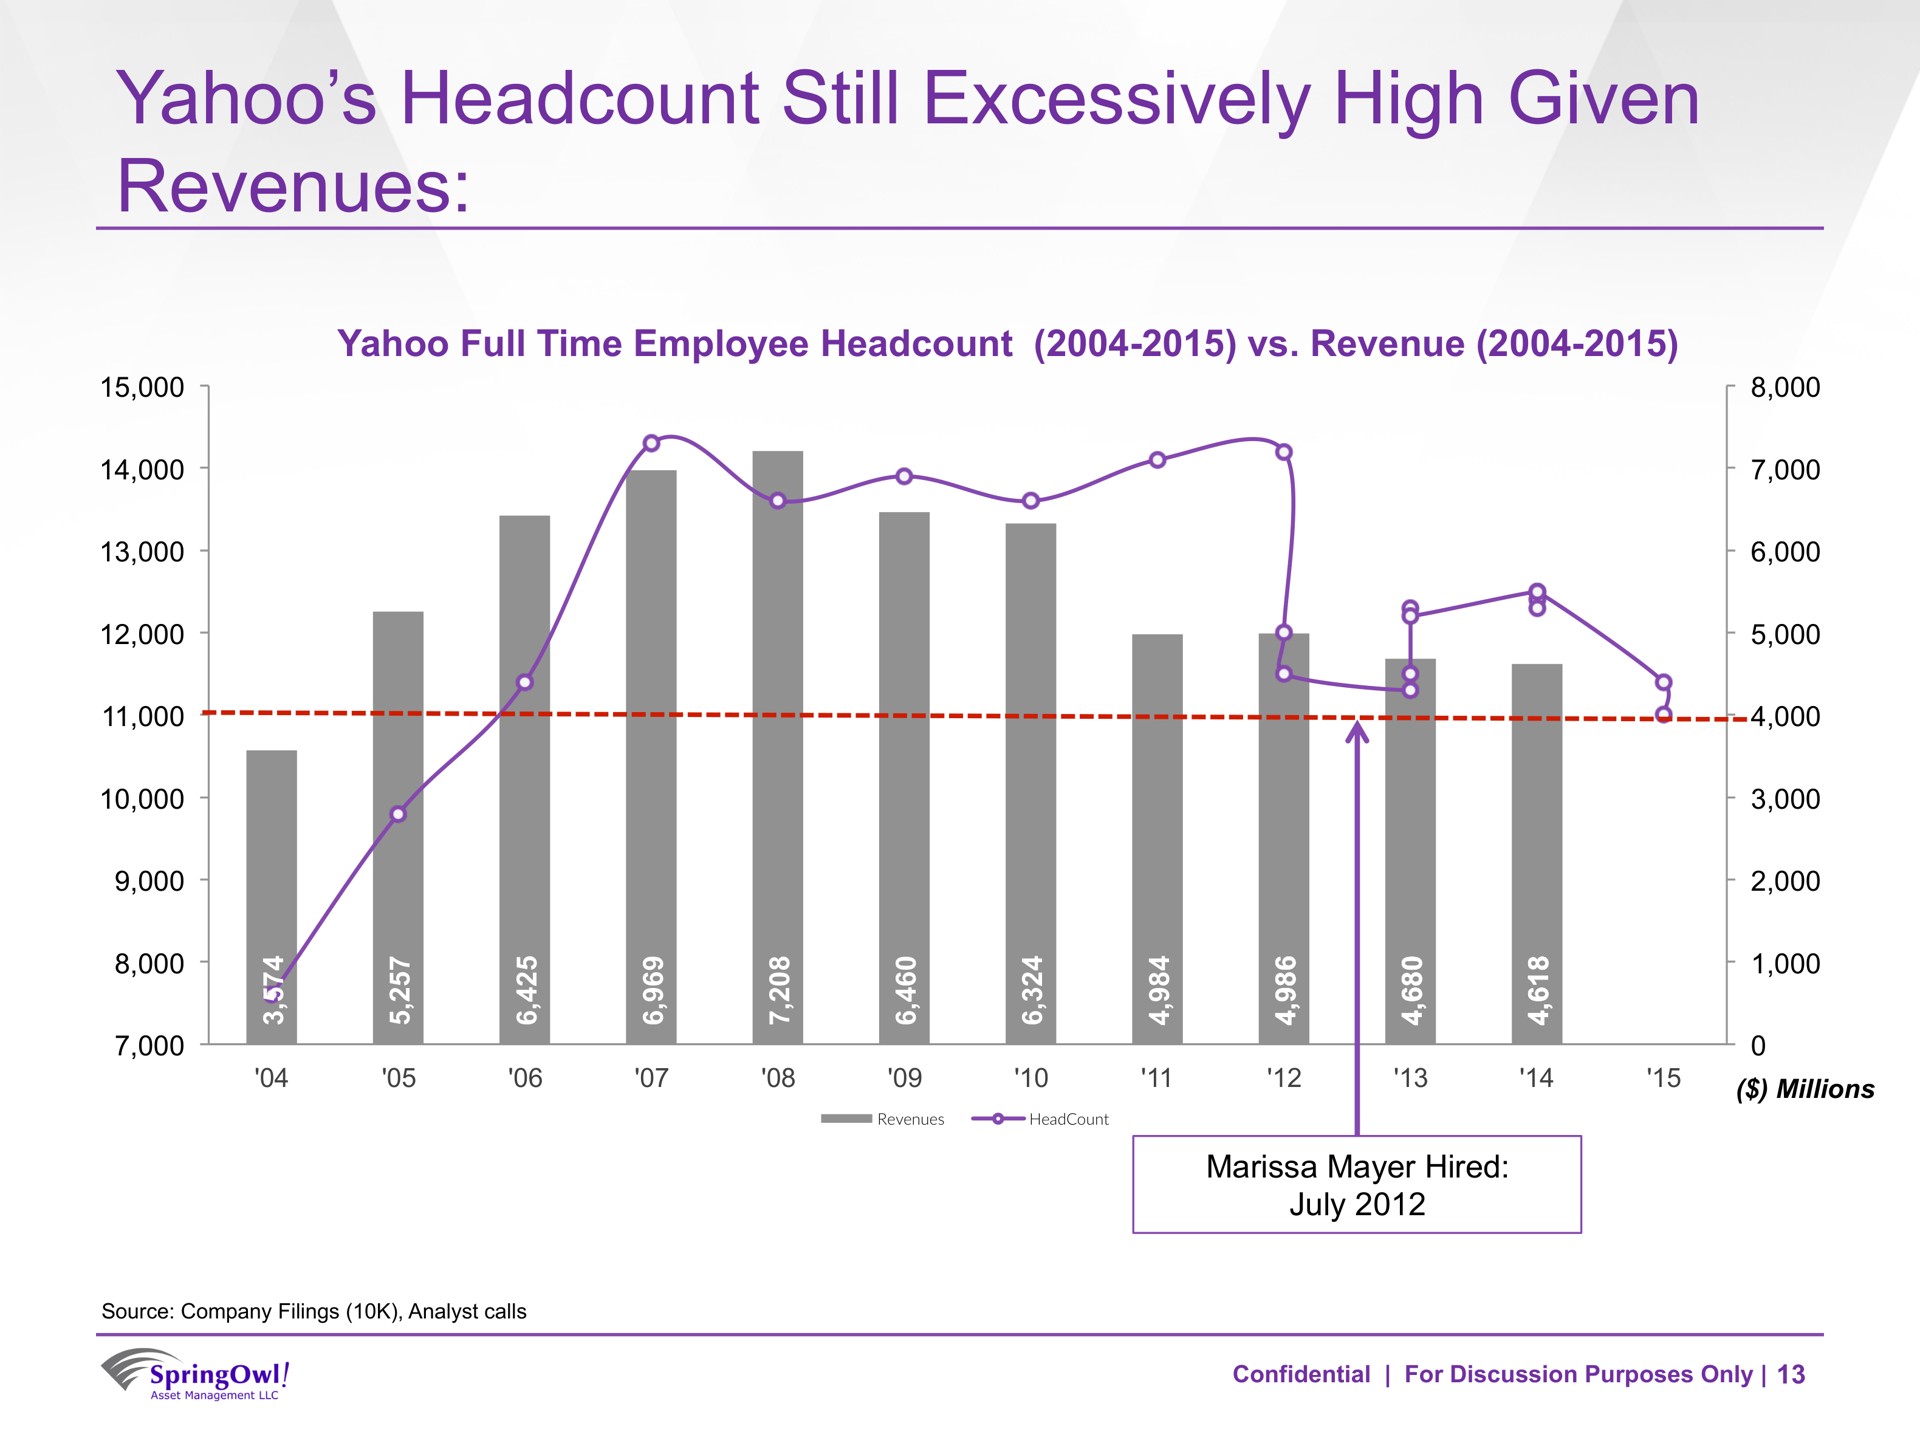 yahoo still excessively high given revenues | SpringOwl